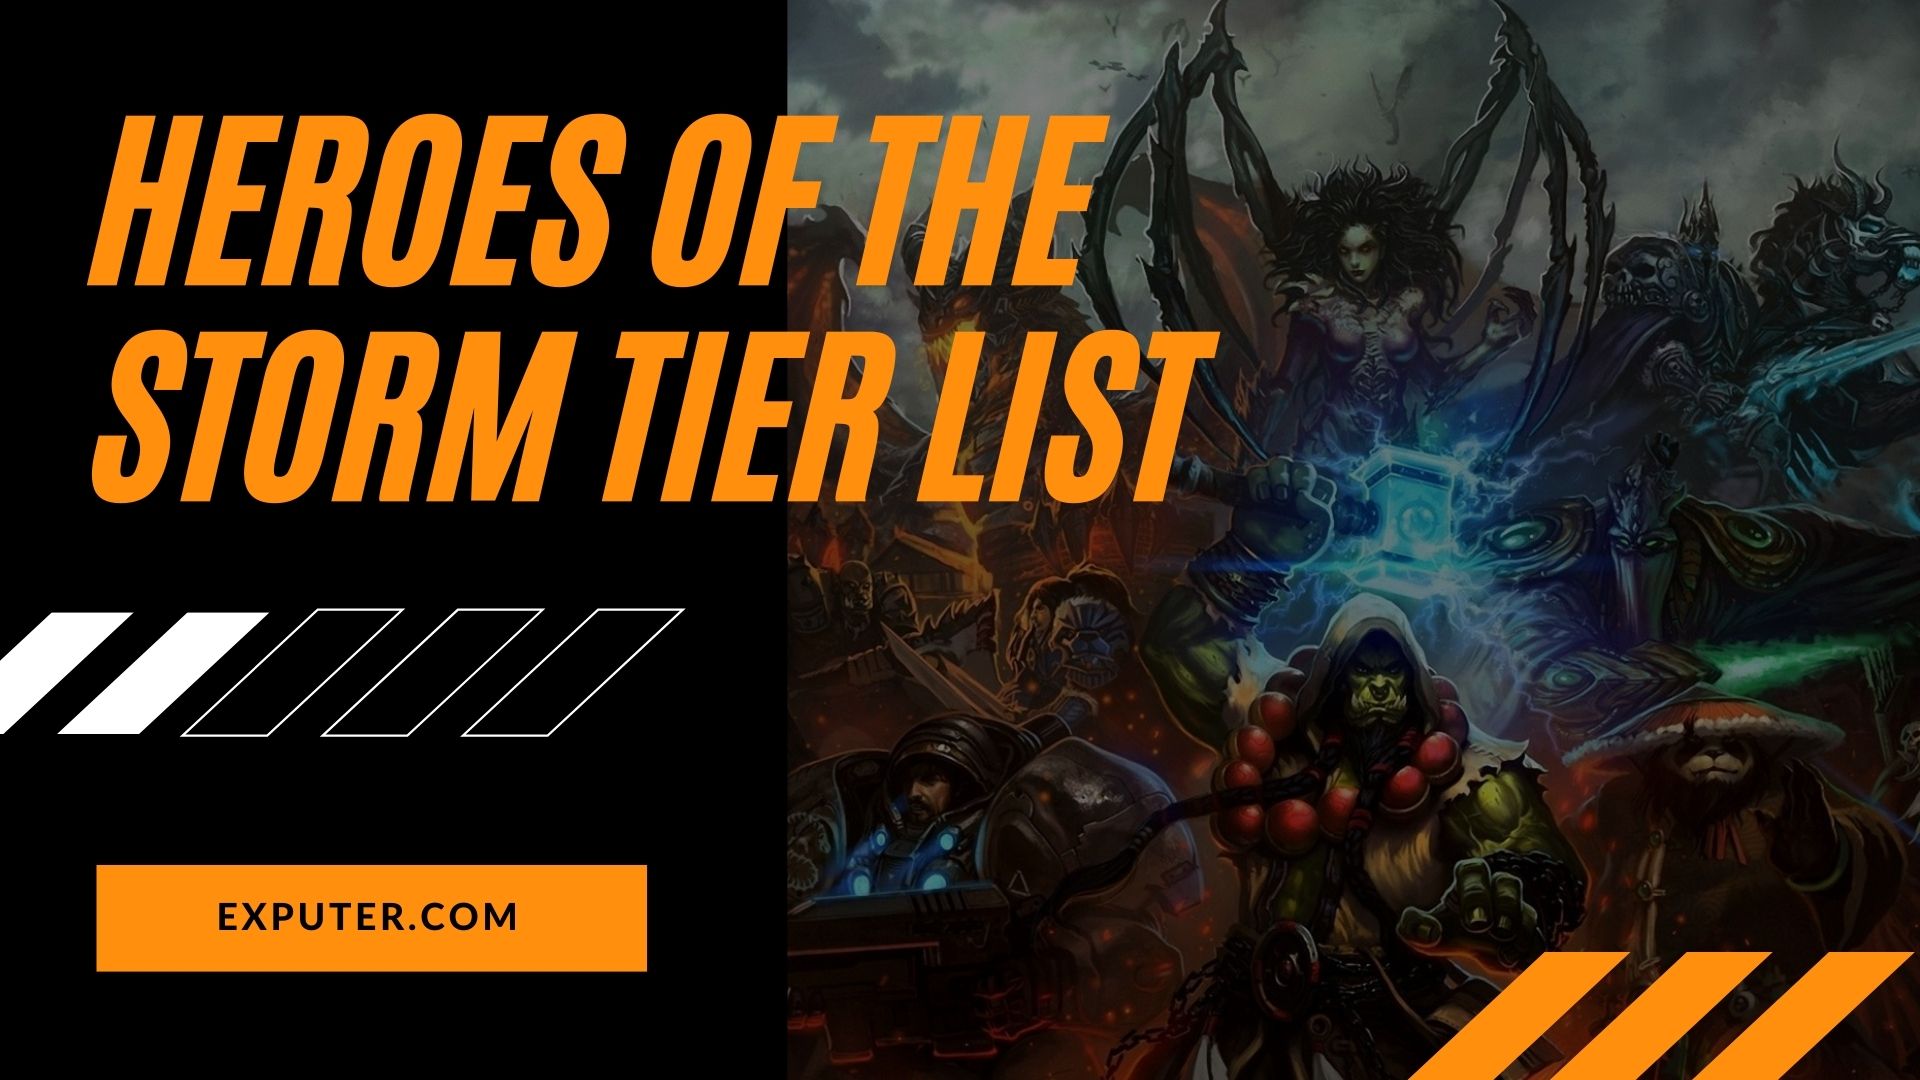 spiller Handel Sovereign Heroes of the Storm Tier List: All Characters Ranked [Dec. 2021]